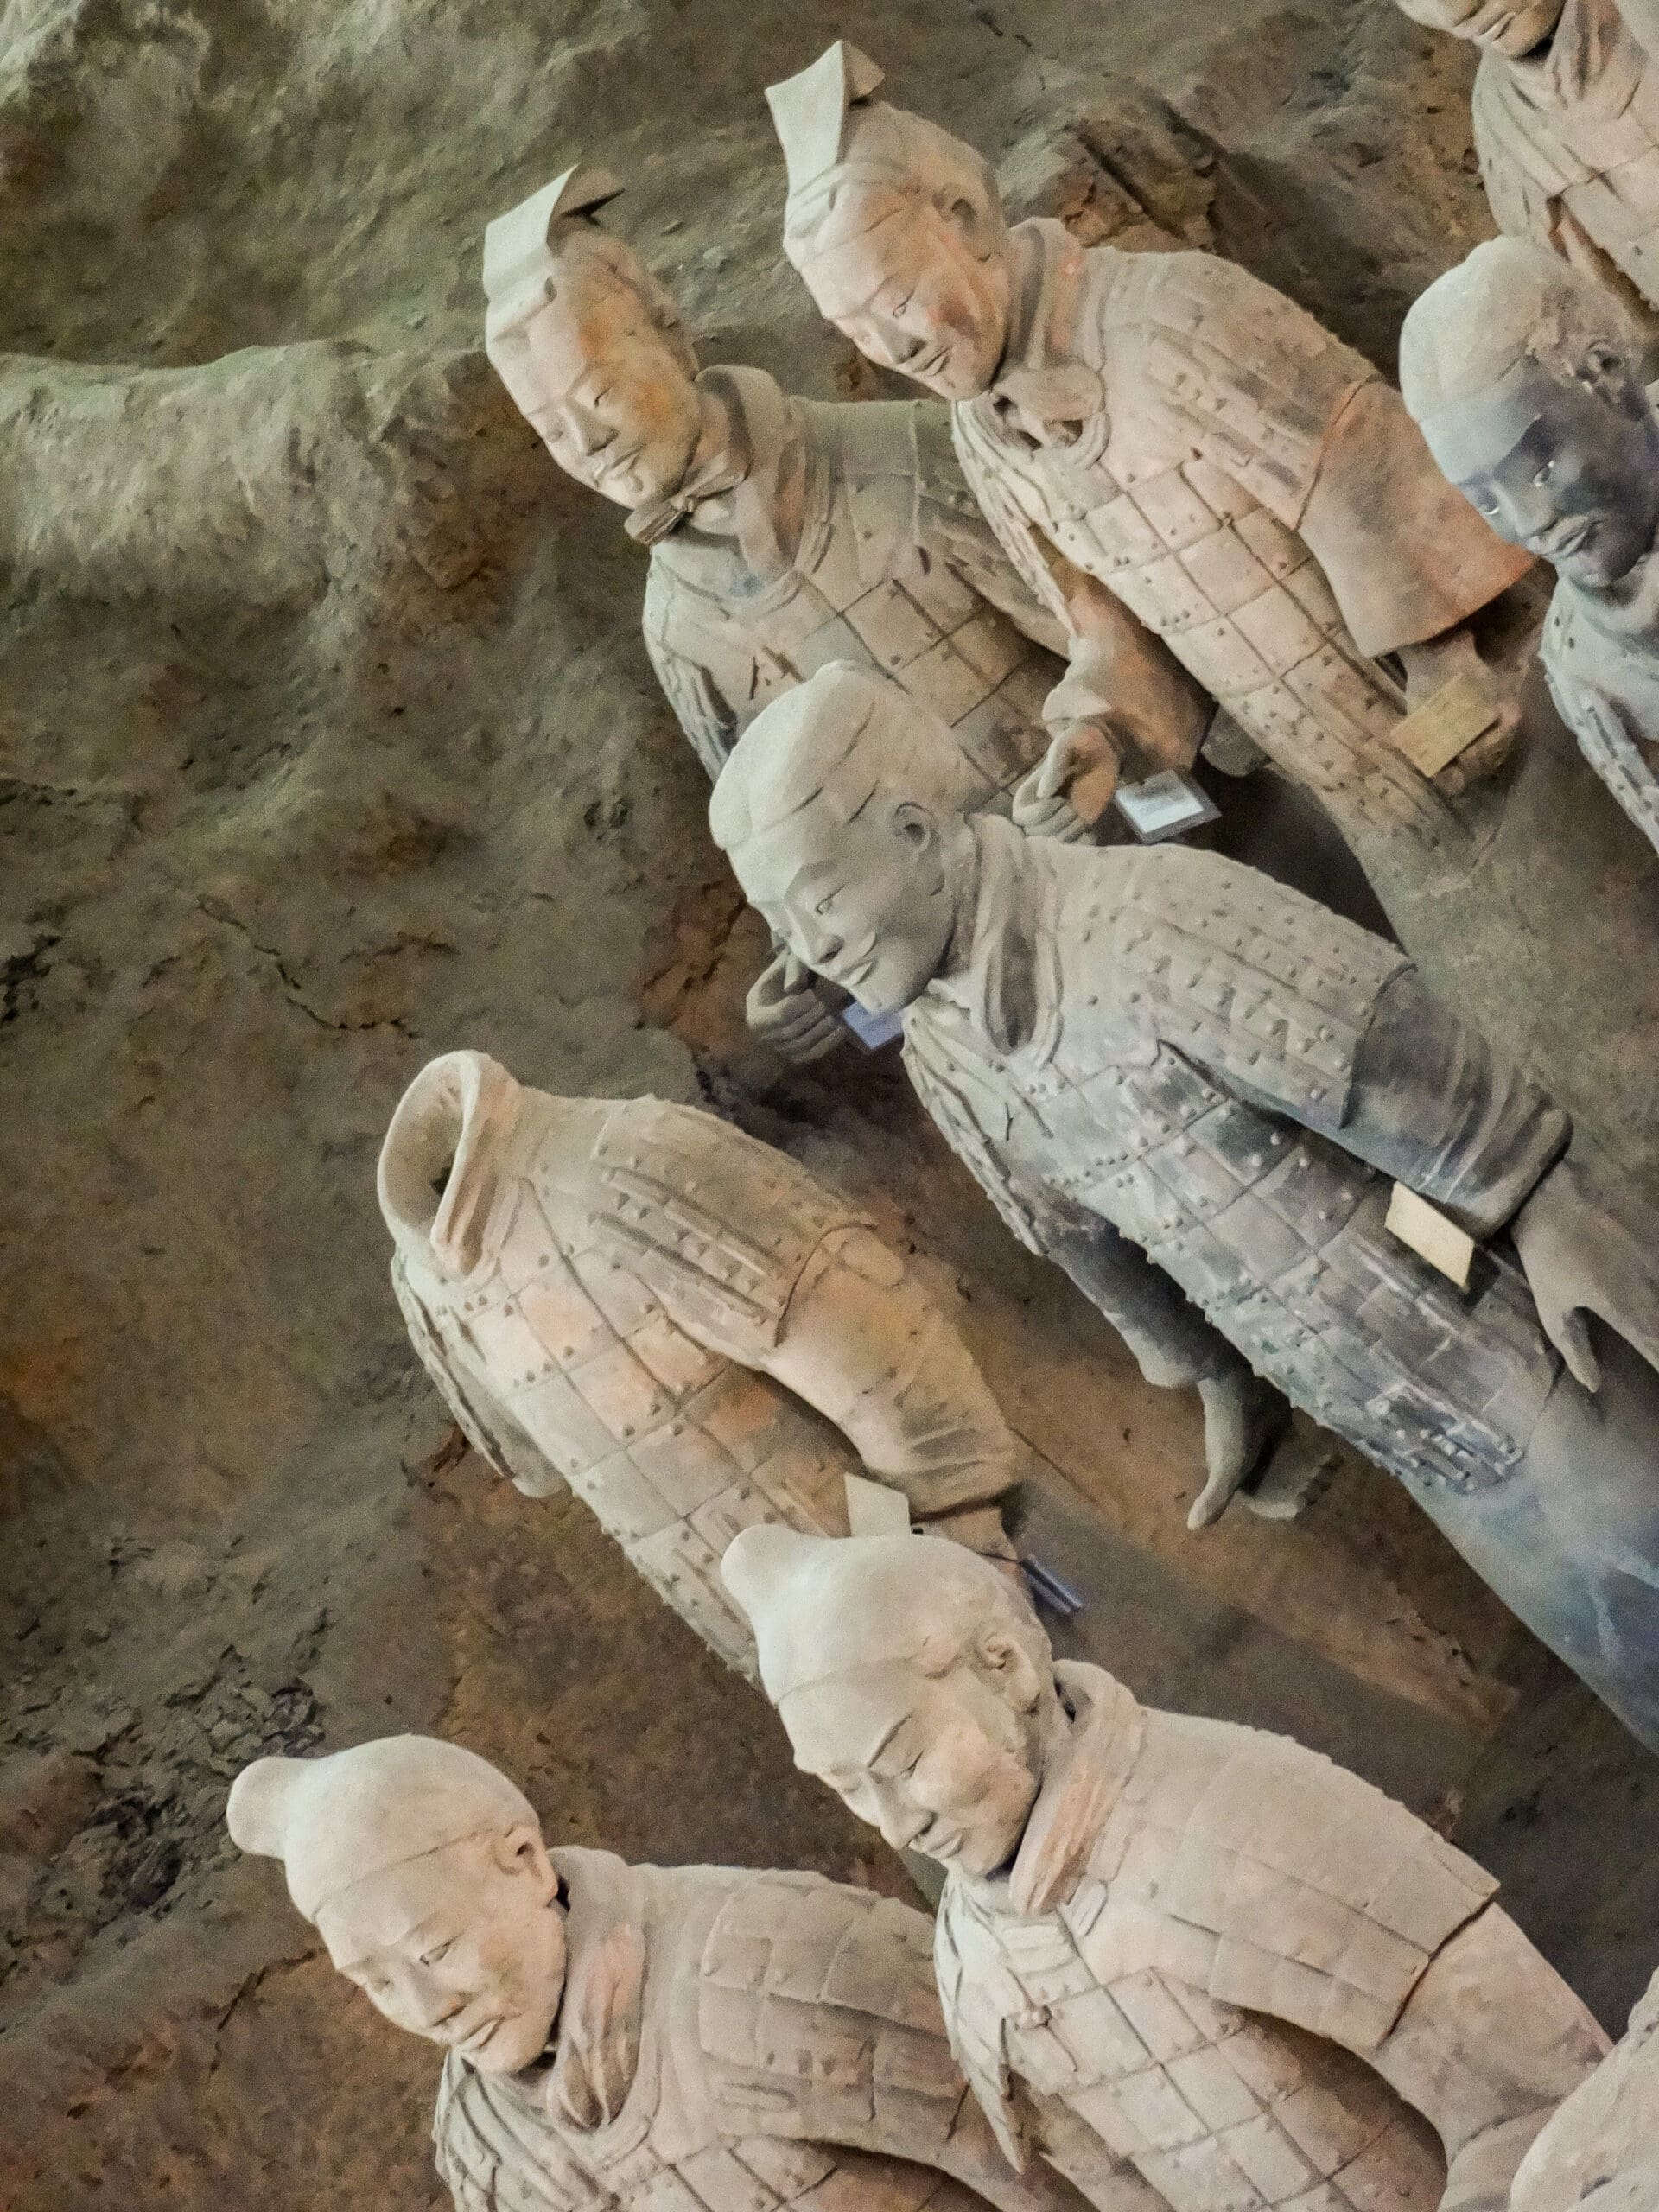 closeup of 6 Terracotta Warriors of the Terracotta Army in a pit in Xian, China